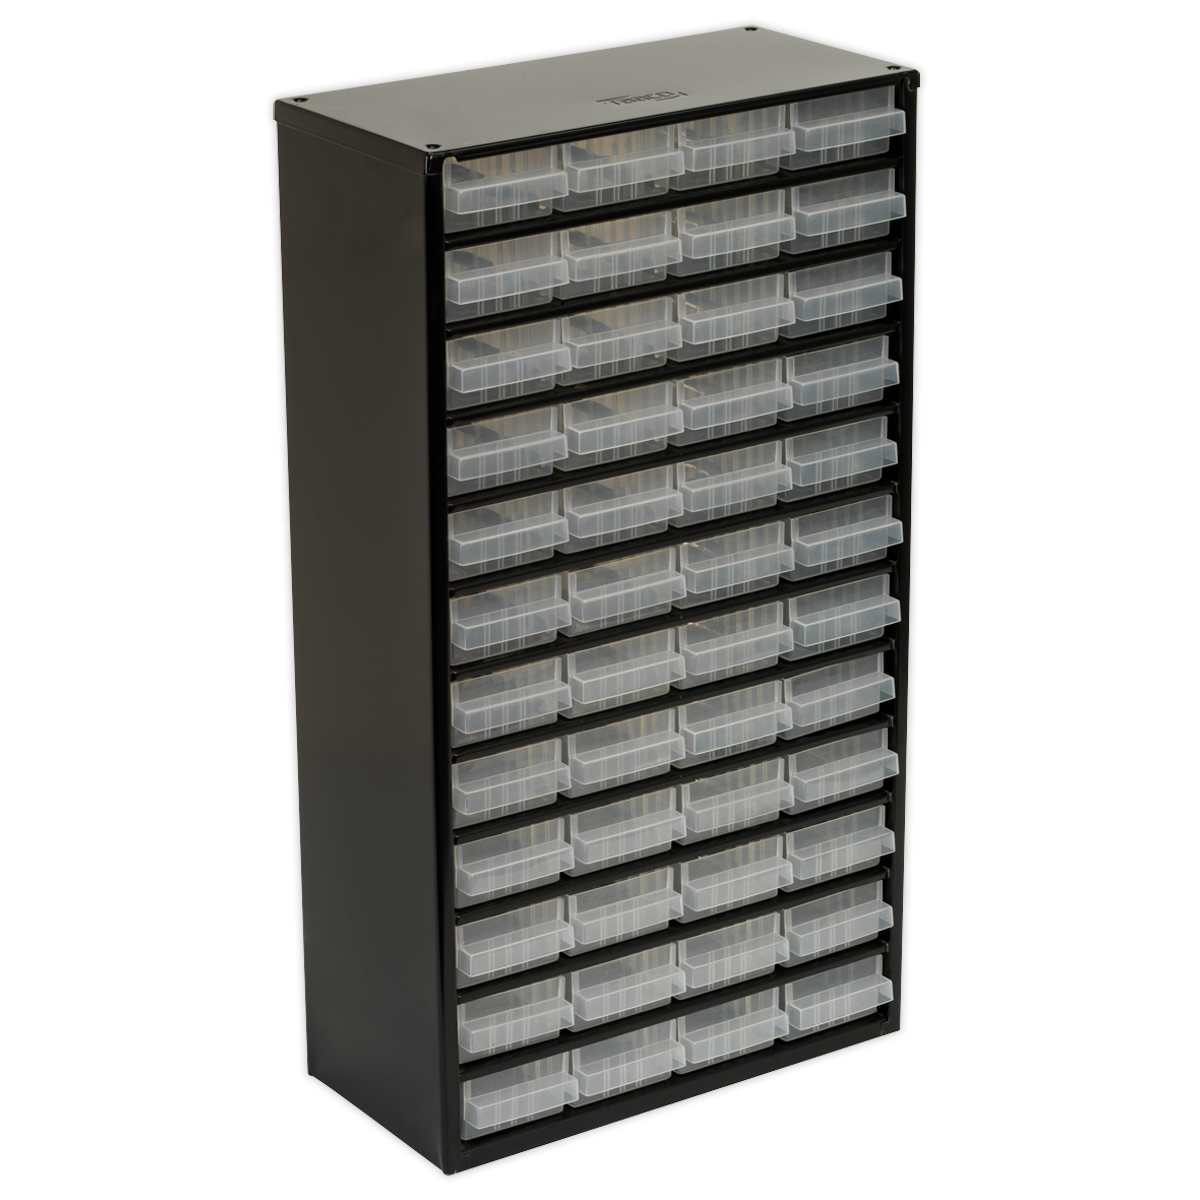 SEALEY - APDC48 Cabinet Box 48 Drawer